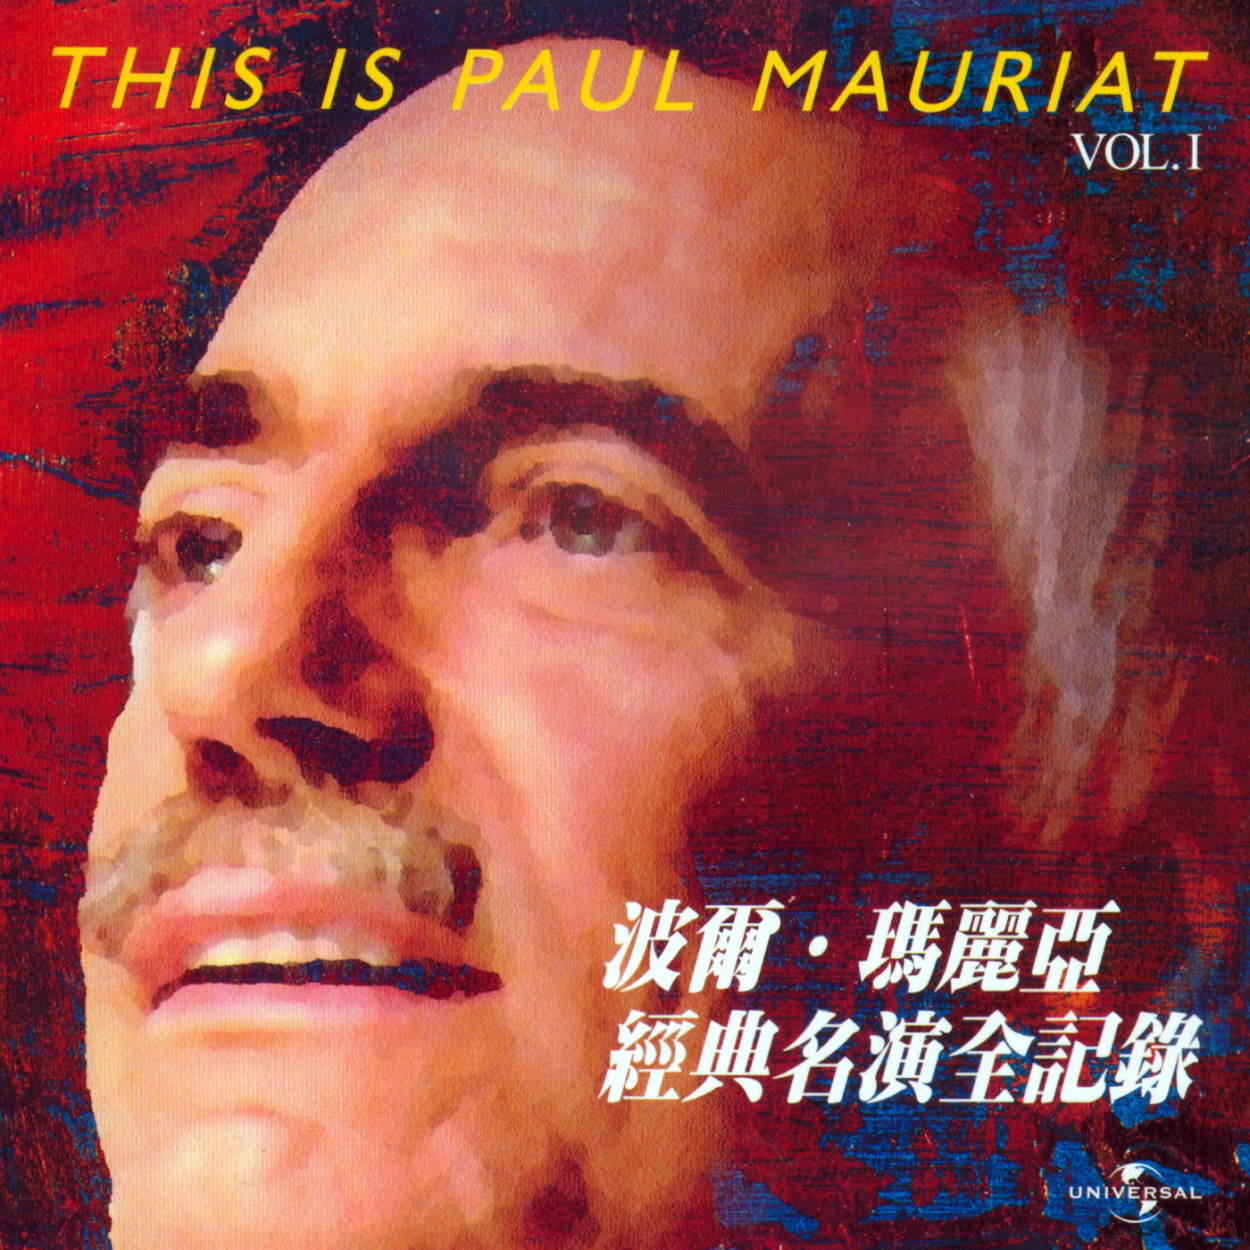 Paul Mauriat - This is Paul Mauriat